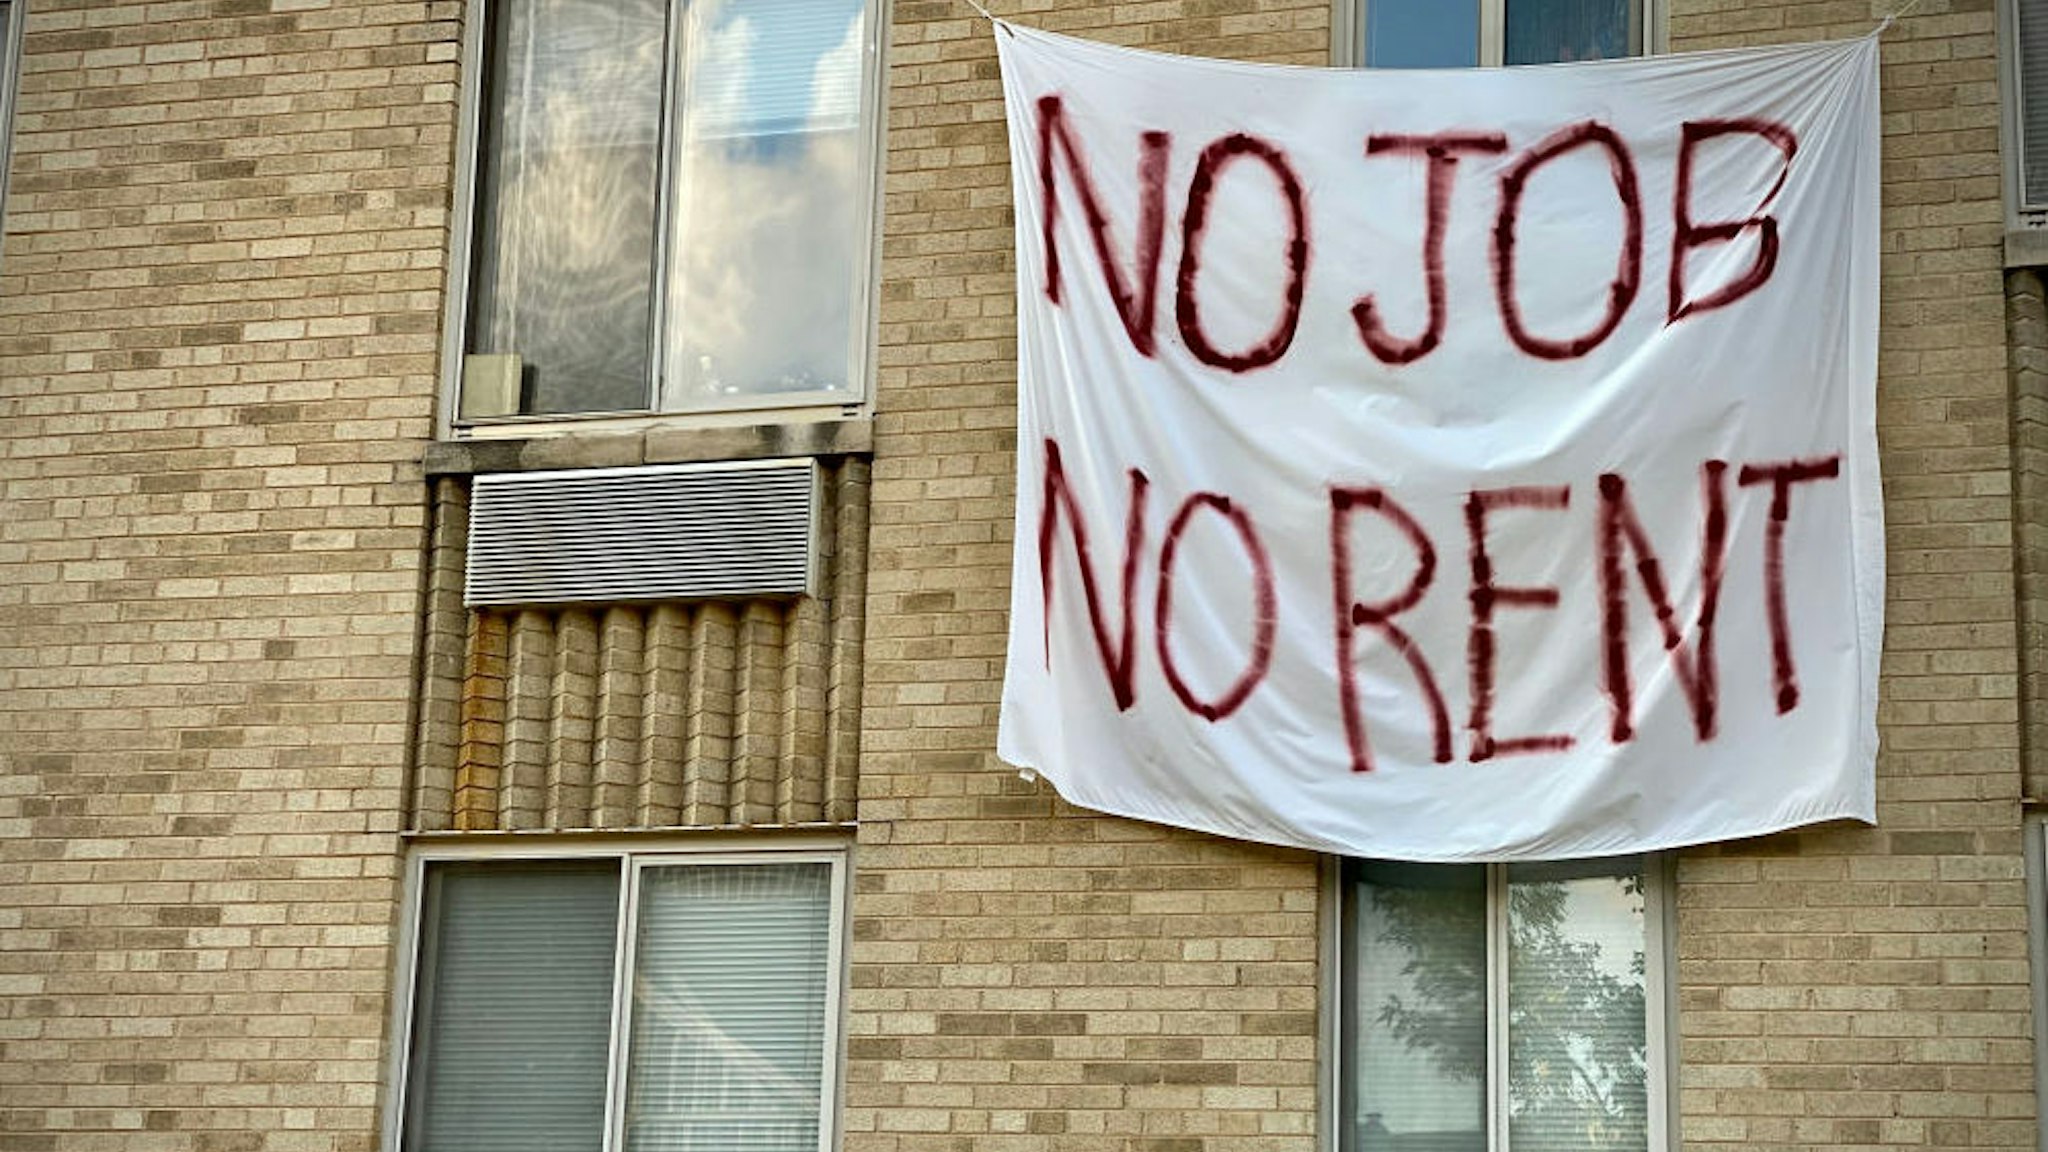 A banner against renters eviction reading no job, no rent is displayed on a controlled rent building in Washington, DC on August 9, 2020. - With double digit unemployment, disruption to businesses from social distancing rules, and persistent coronavirus spread, many Americans had been relying on relief measures approved earlier by Congress, but which mostly expired in July. One key Trump order promises to get $400 a week added to Americans' unemployment benefits, while two others offer some protection from evictions and relief for student loans.